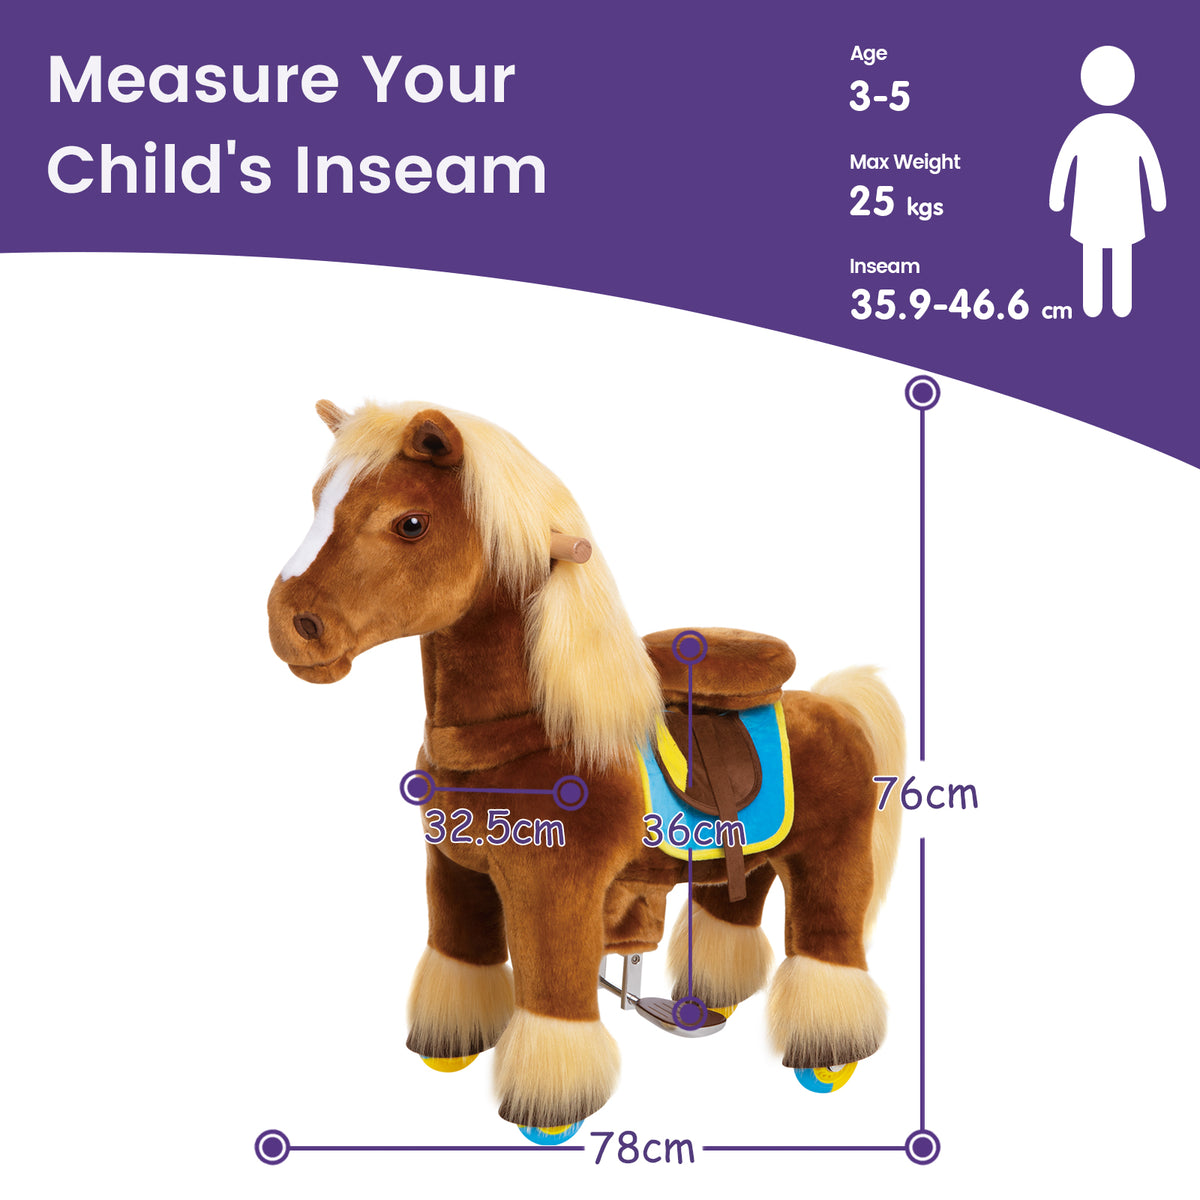 Model X Ride-on Horse Toy - Brown Horse